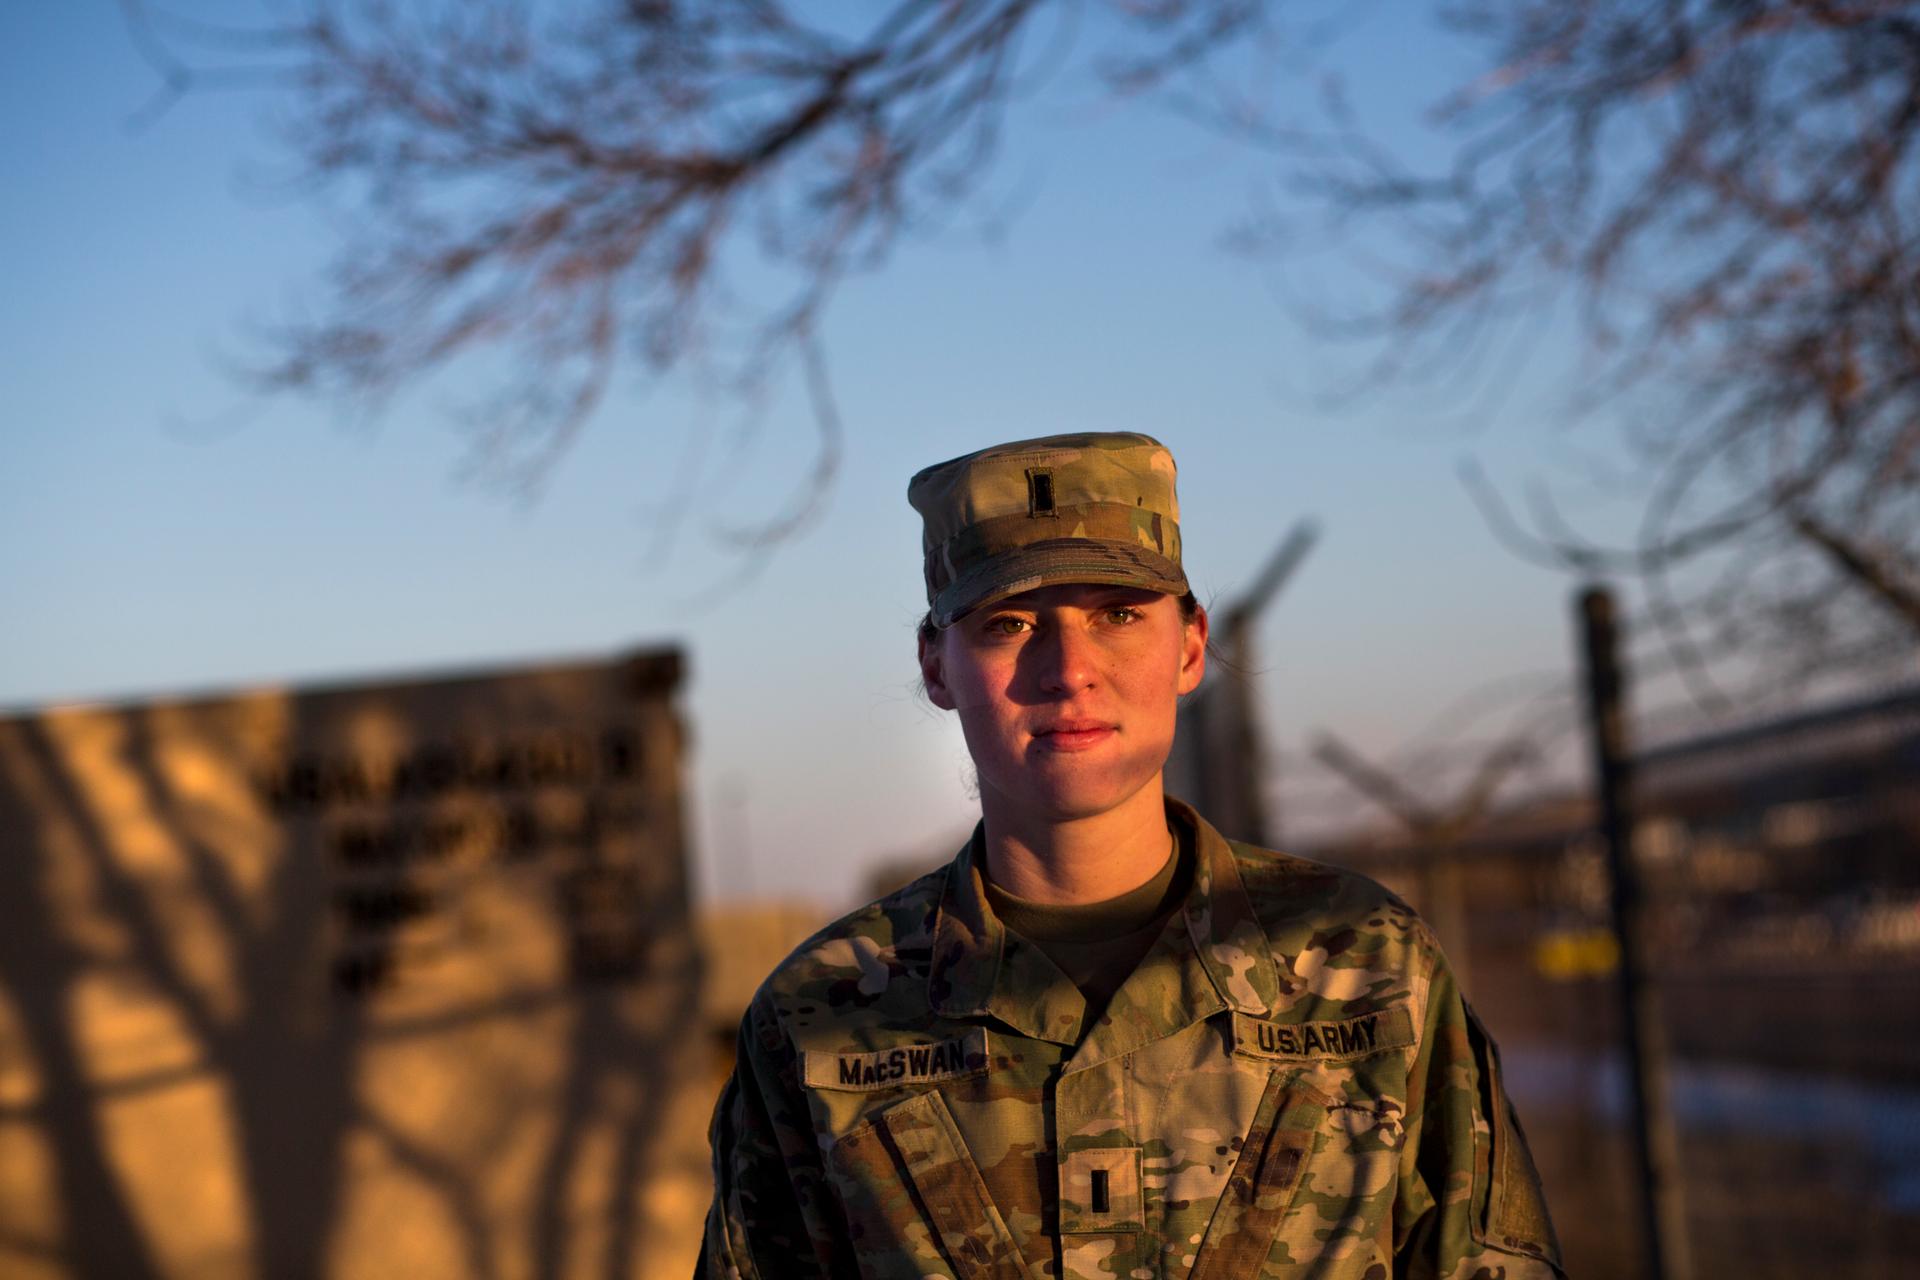 First Lieutenant Erica MacSwan is an intelligence officer with the US army. Here, she has days to go before she is deployed to Afghanistan for about a year.